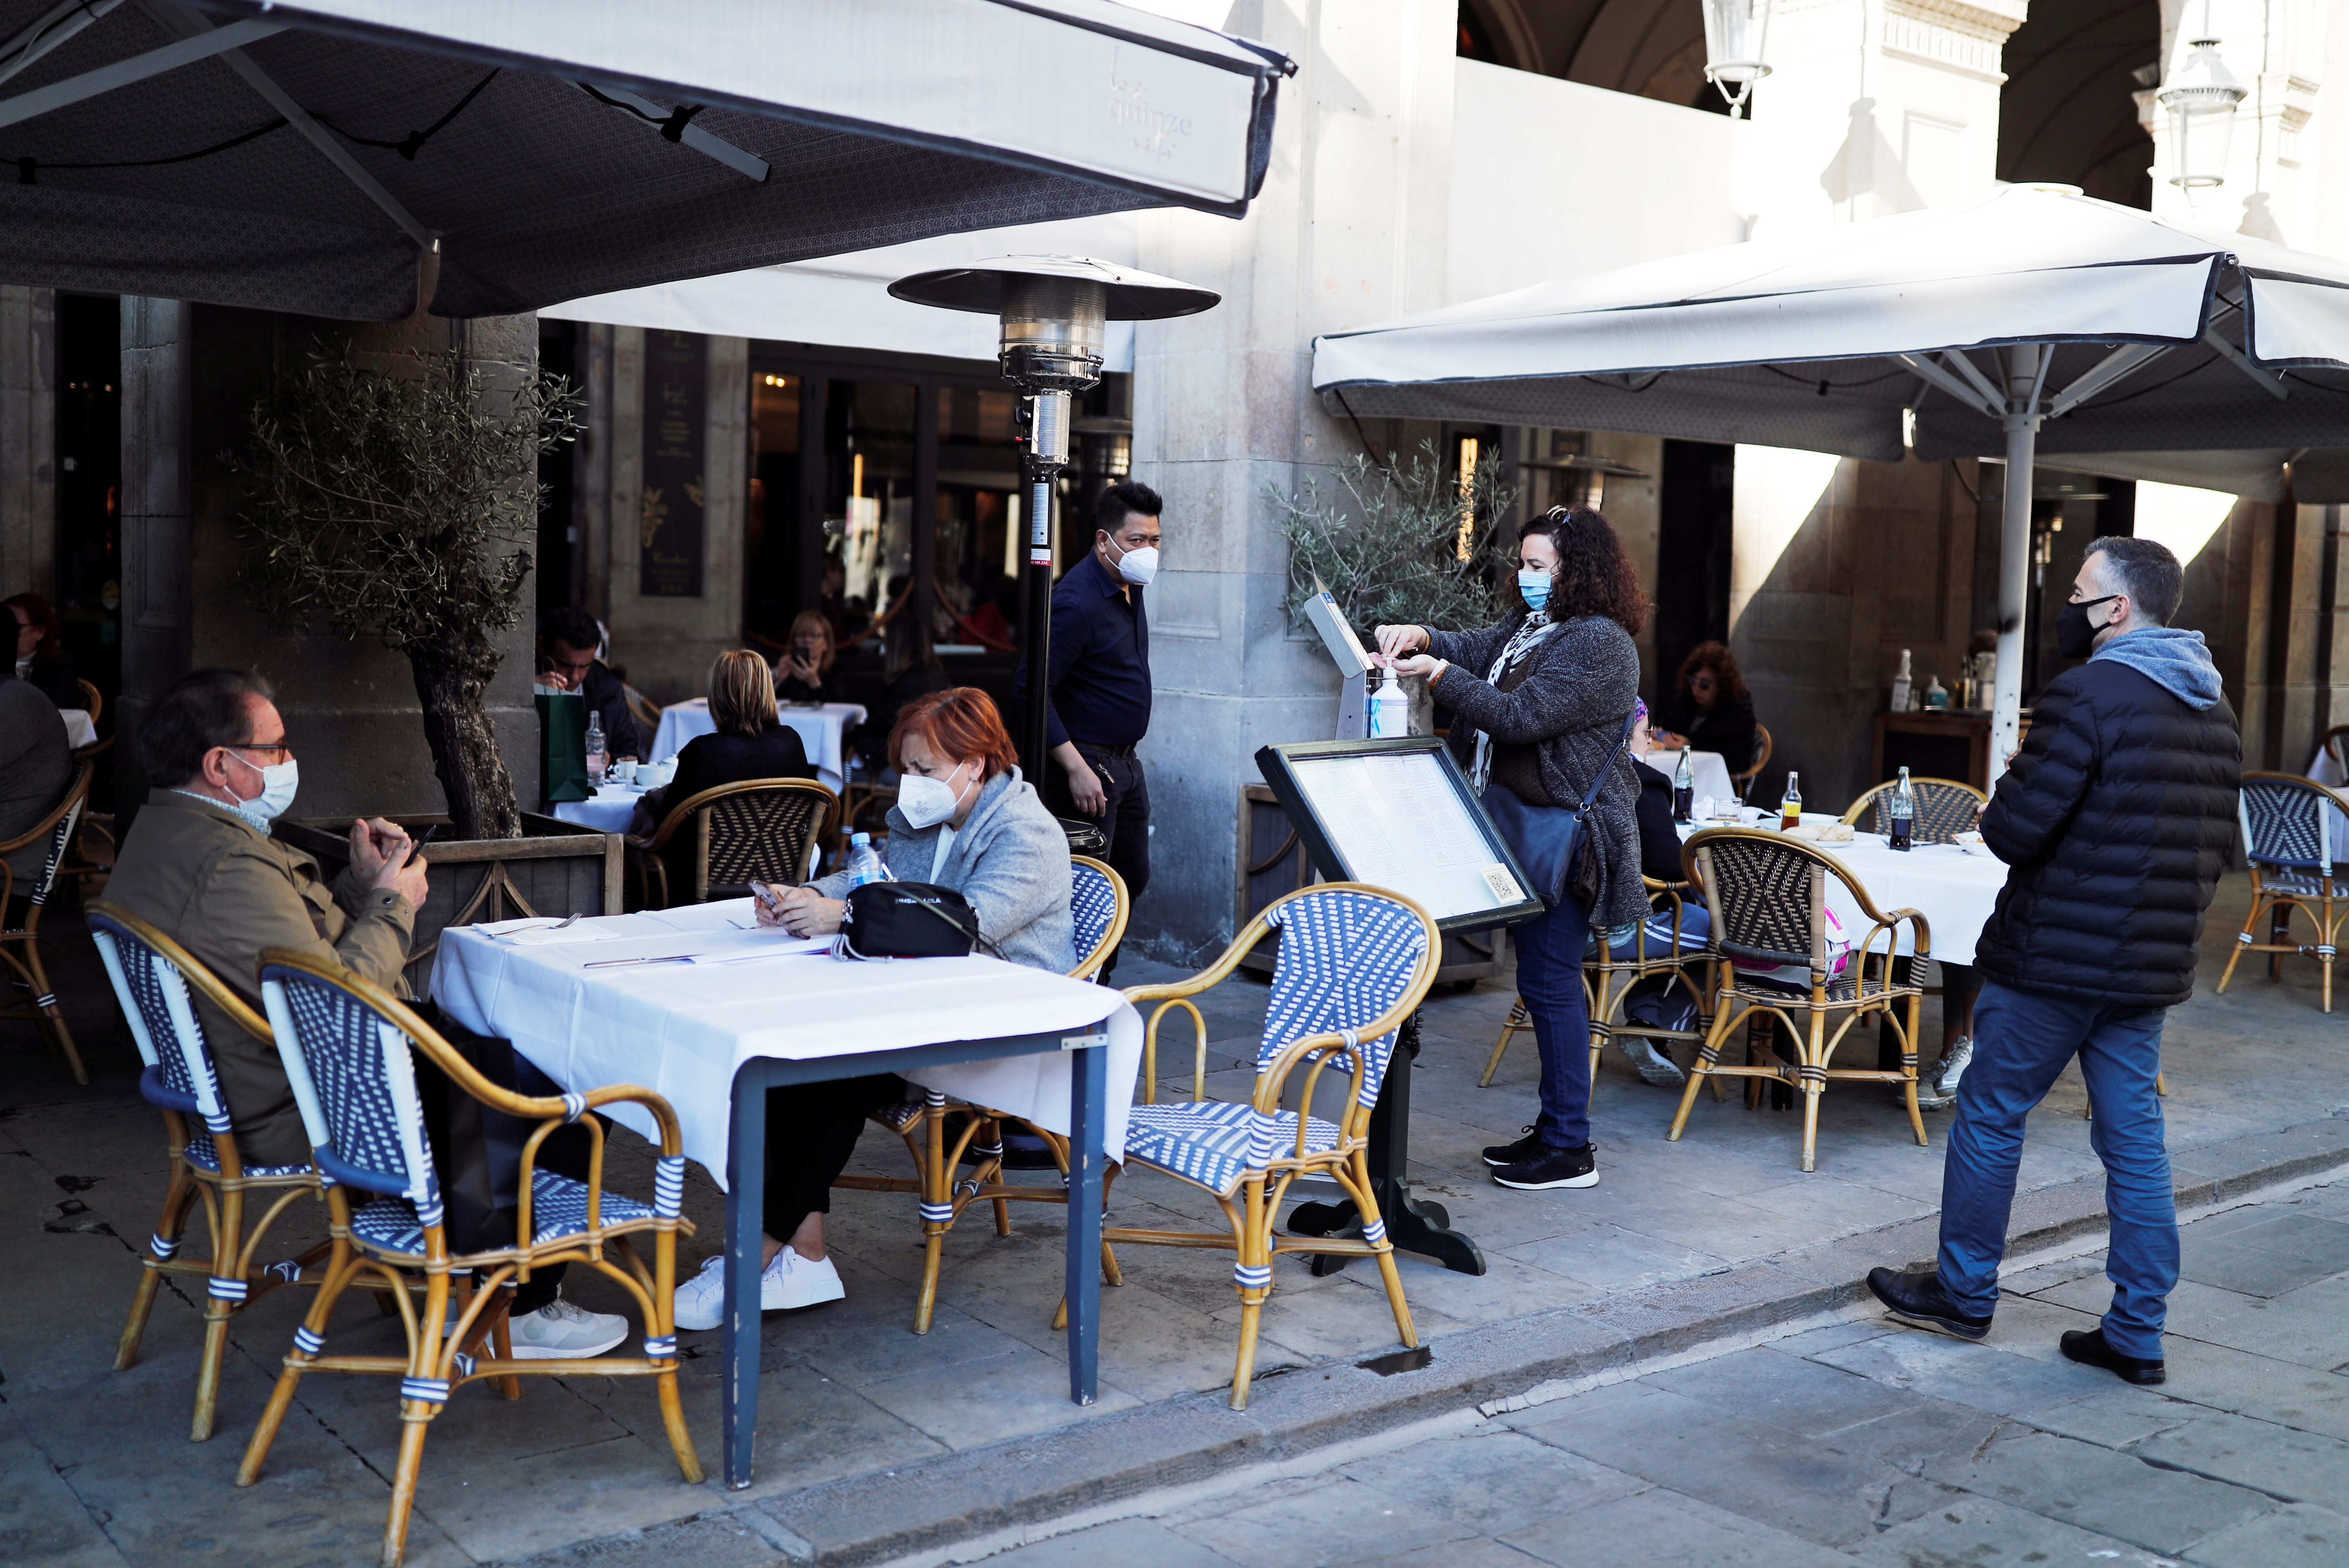 People wearing face masks sit at the terrace of the Les Quinze Nits restaurant on Real square, after Spain's Catalonia region allowed bars, restaurants, gyms and cinemas to reopen from Monday, gradually easing some of the restrictions put in place to tackle the coronavirus disease (COVID-19) outbreak, in Barcelona, Spain, November 23, 2020. REUTERS/Nacho Doce